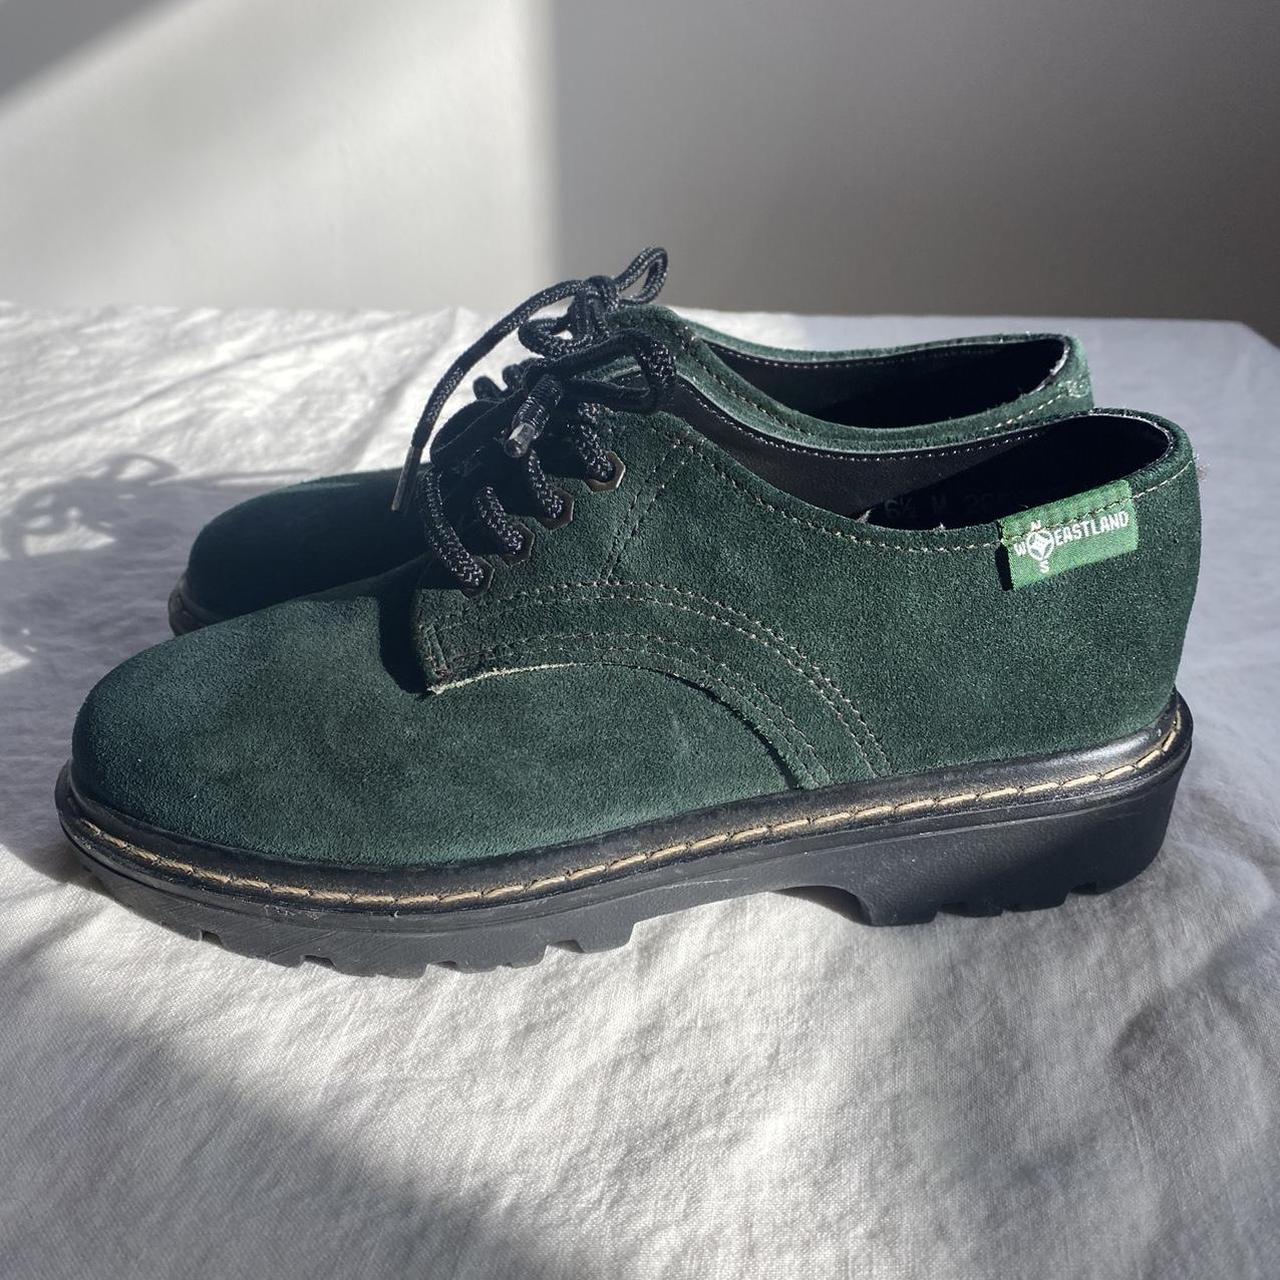 Eastland Women's Green and Black Oxfords (3)